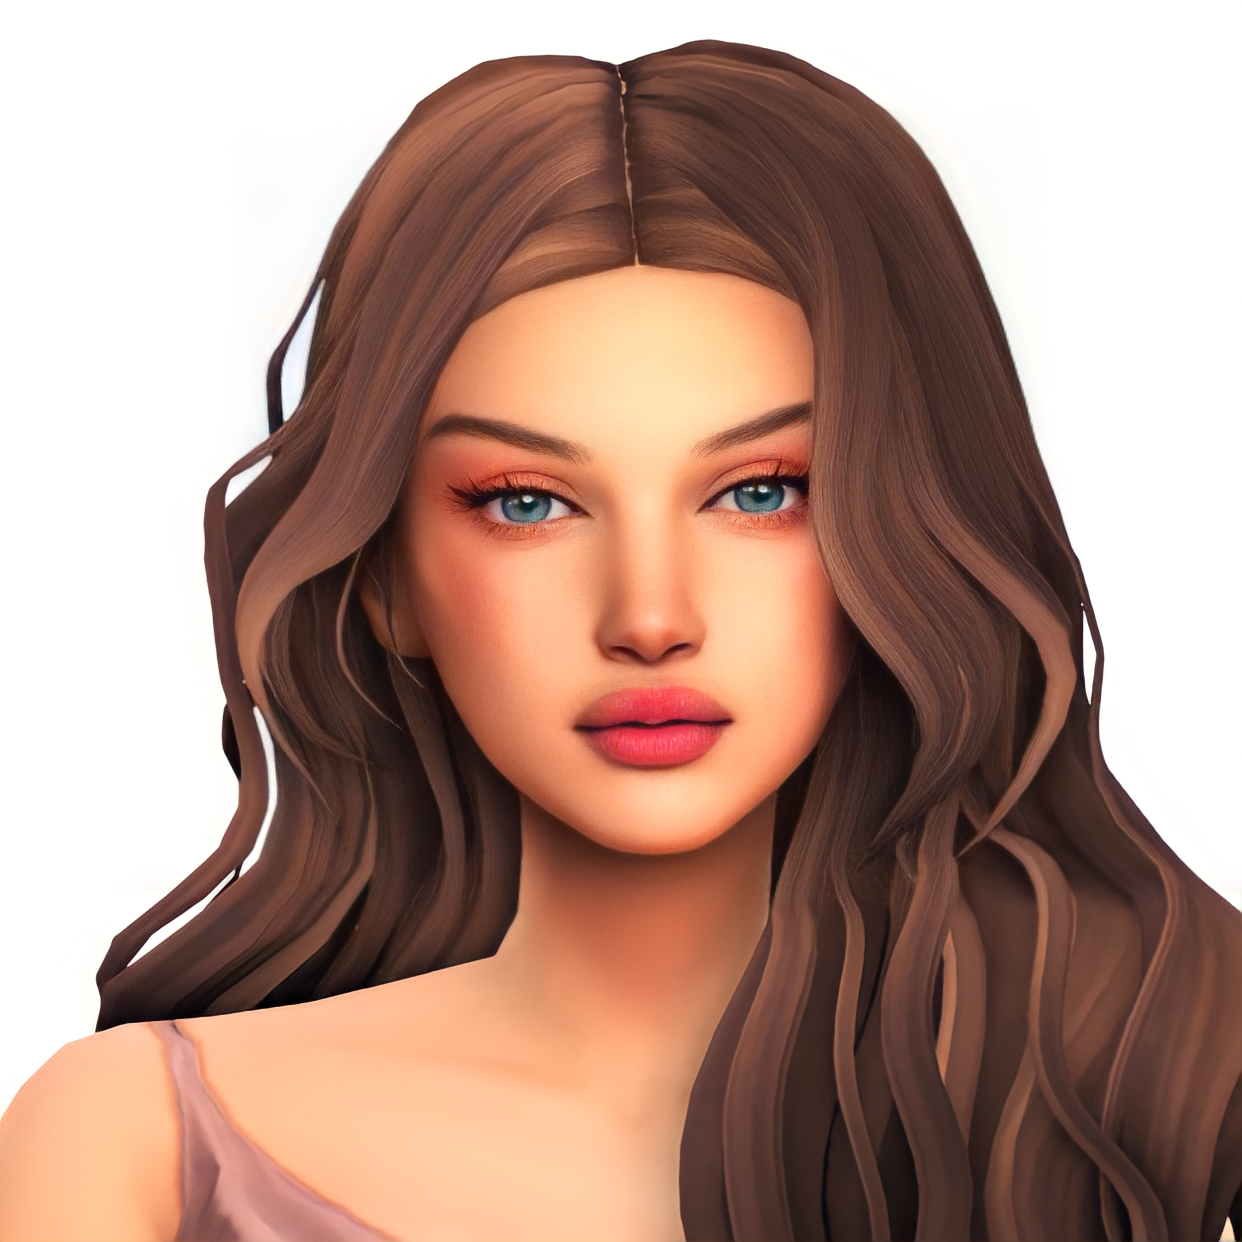 Download Clara Jacques - The Sims 4 Mods - CurseForge